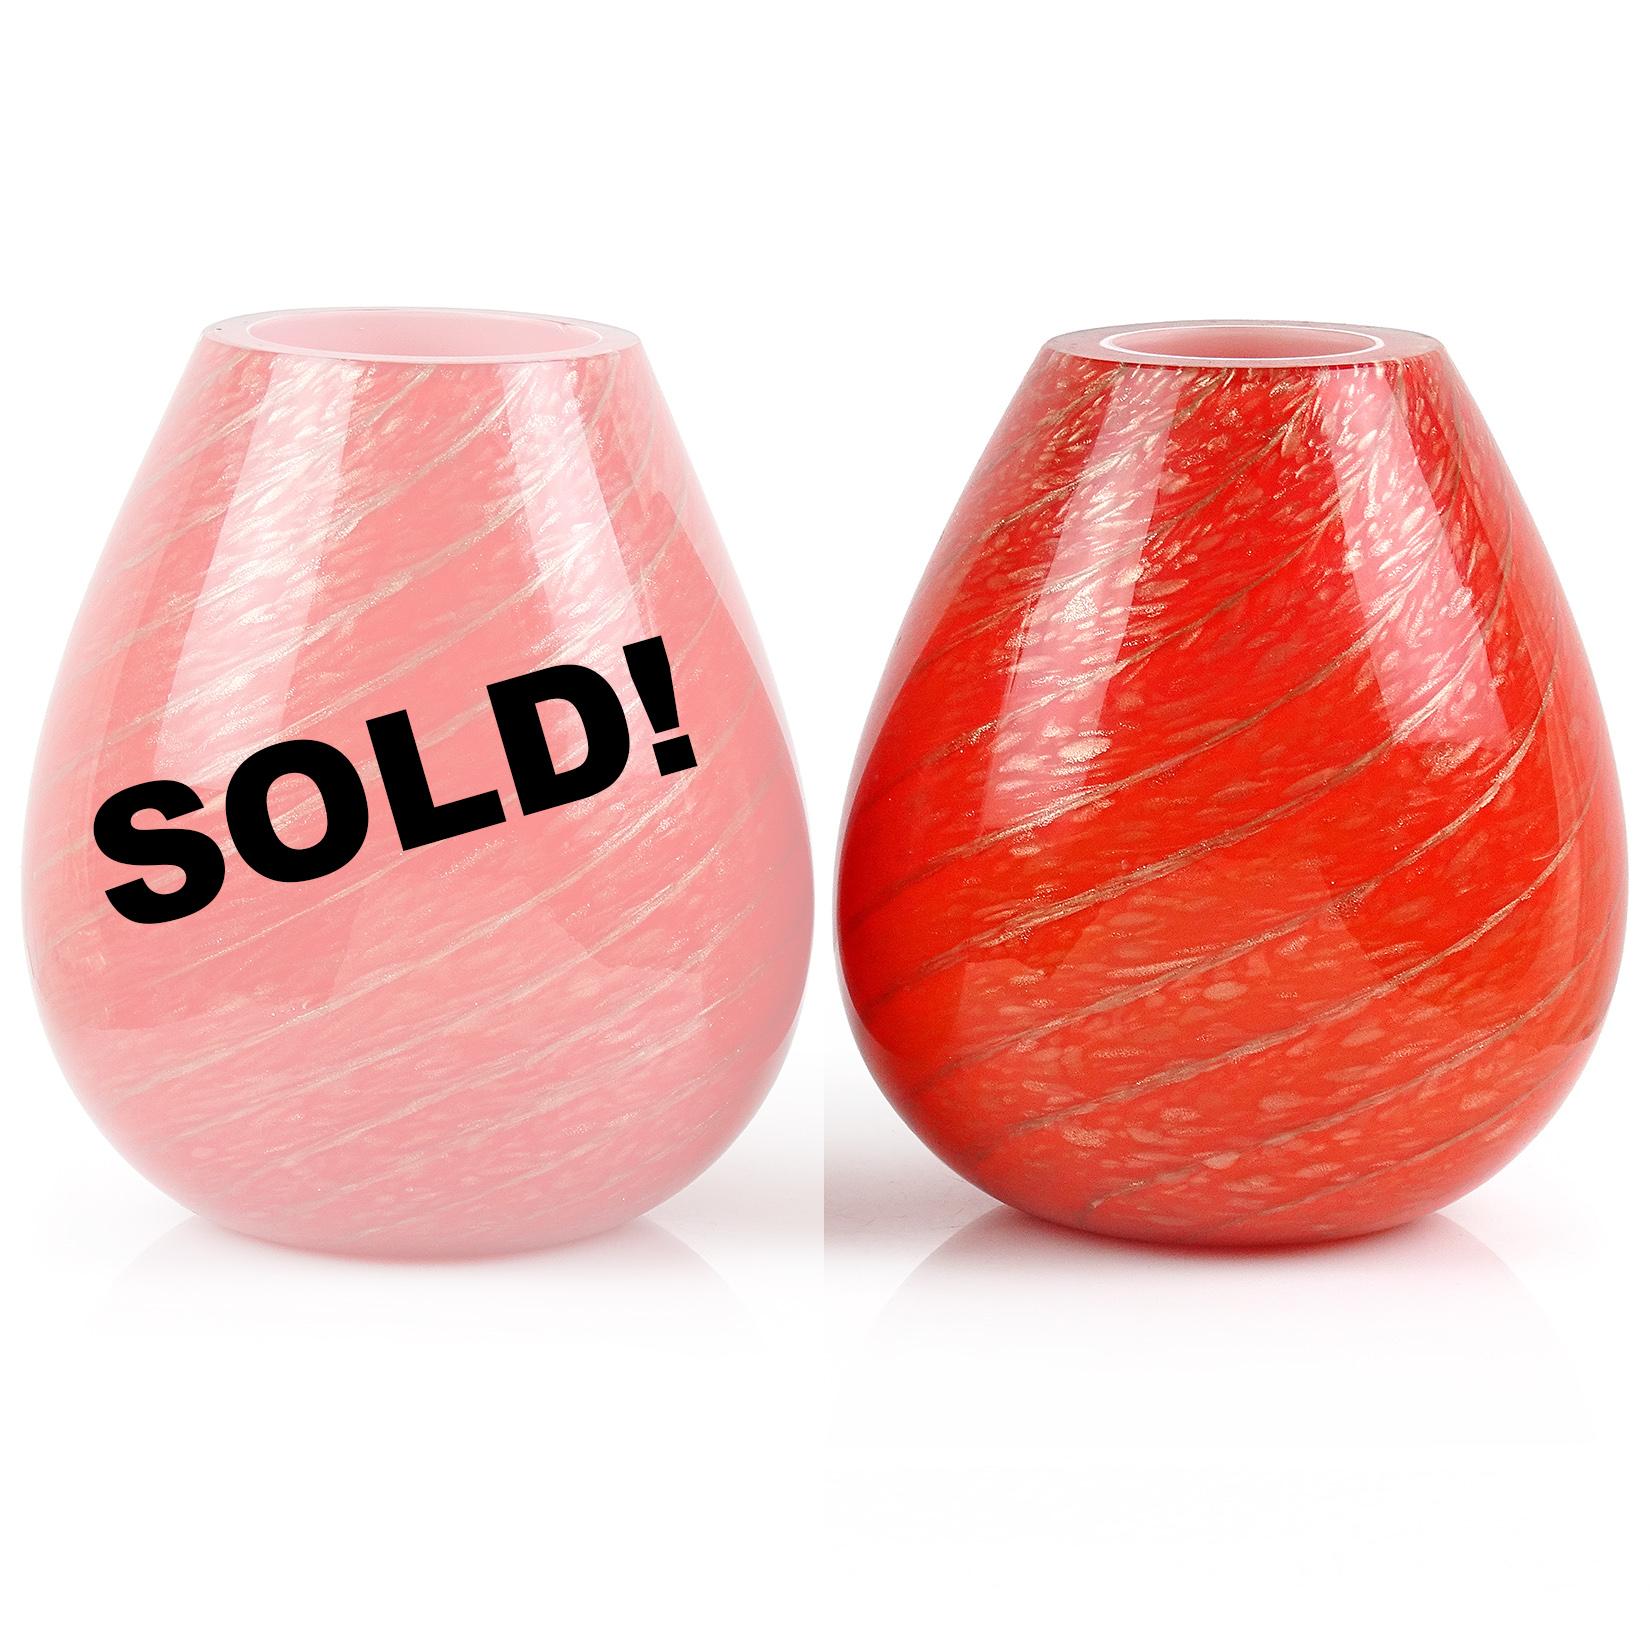 Only 1 Left! Beautiful vintage Murano handblown red over white, and aventurine Italian art glass flower vase. Documented to the Fratelli Toso Company. Published in their book (last photo). The vase has a candy cane swirl design with heavy copper